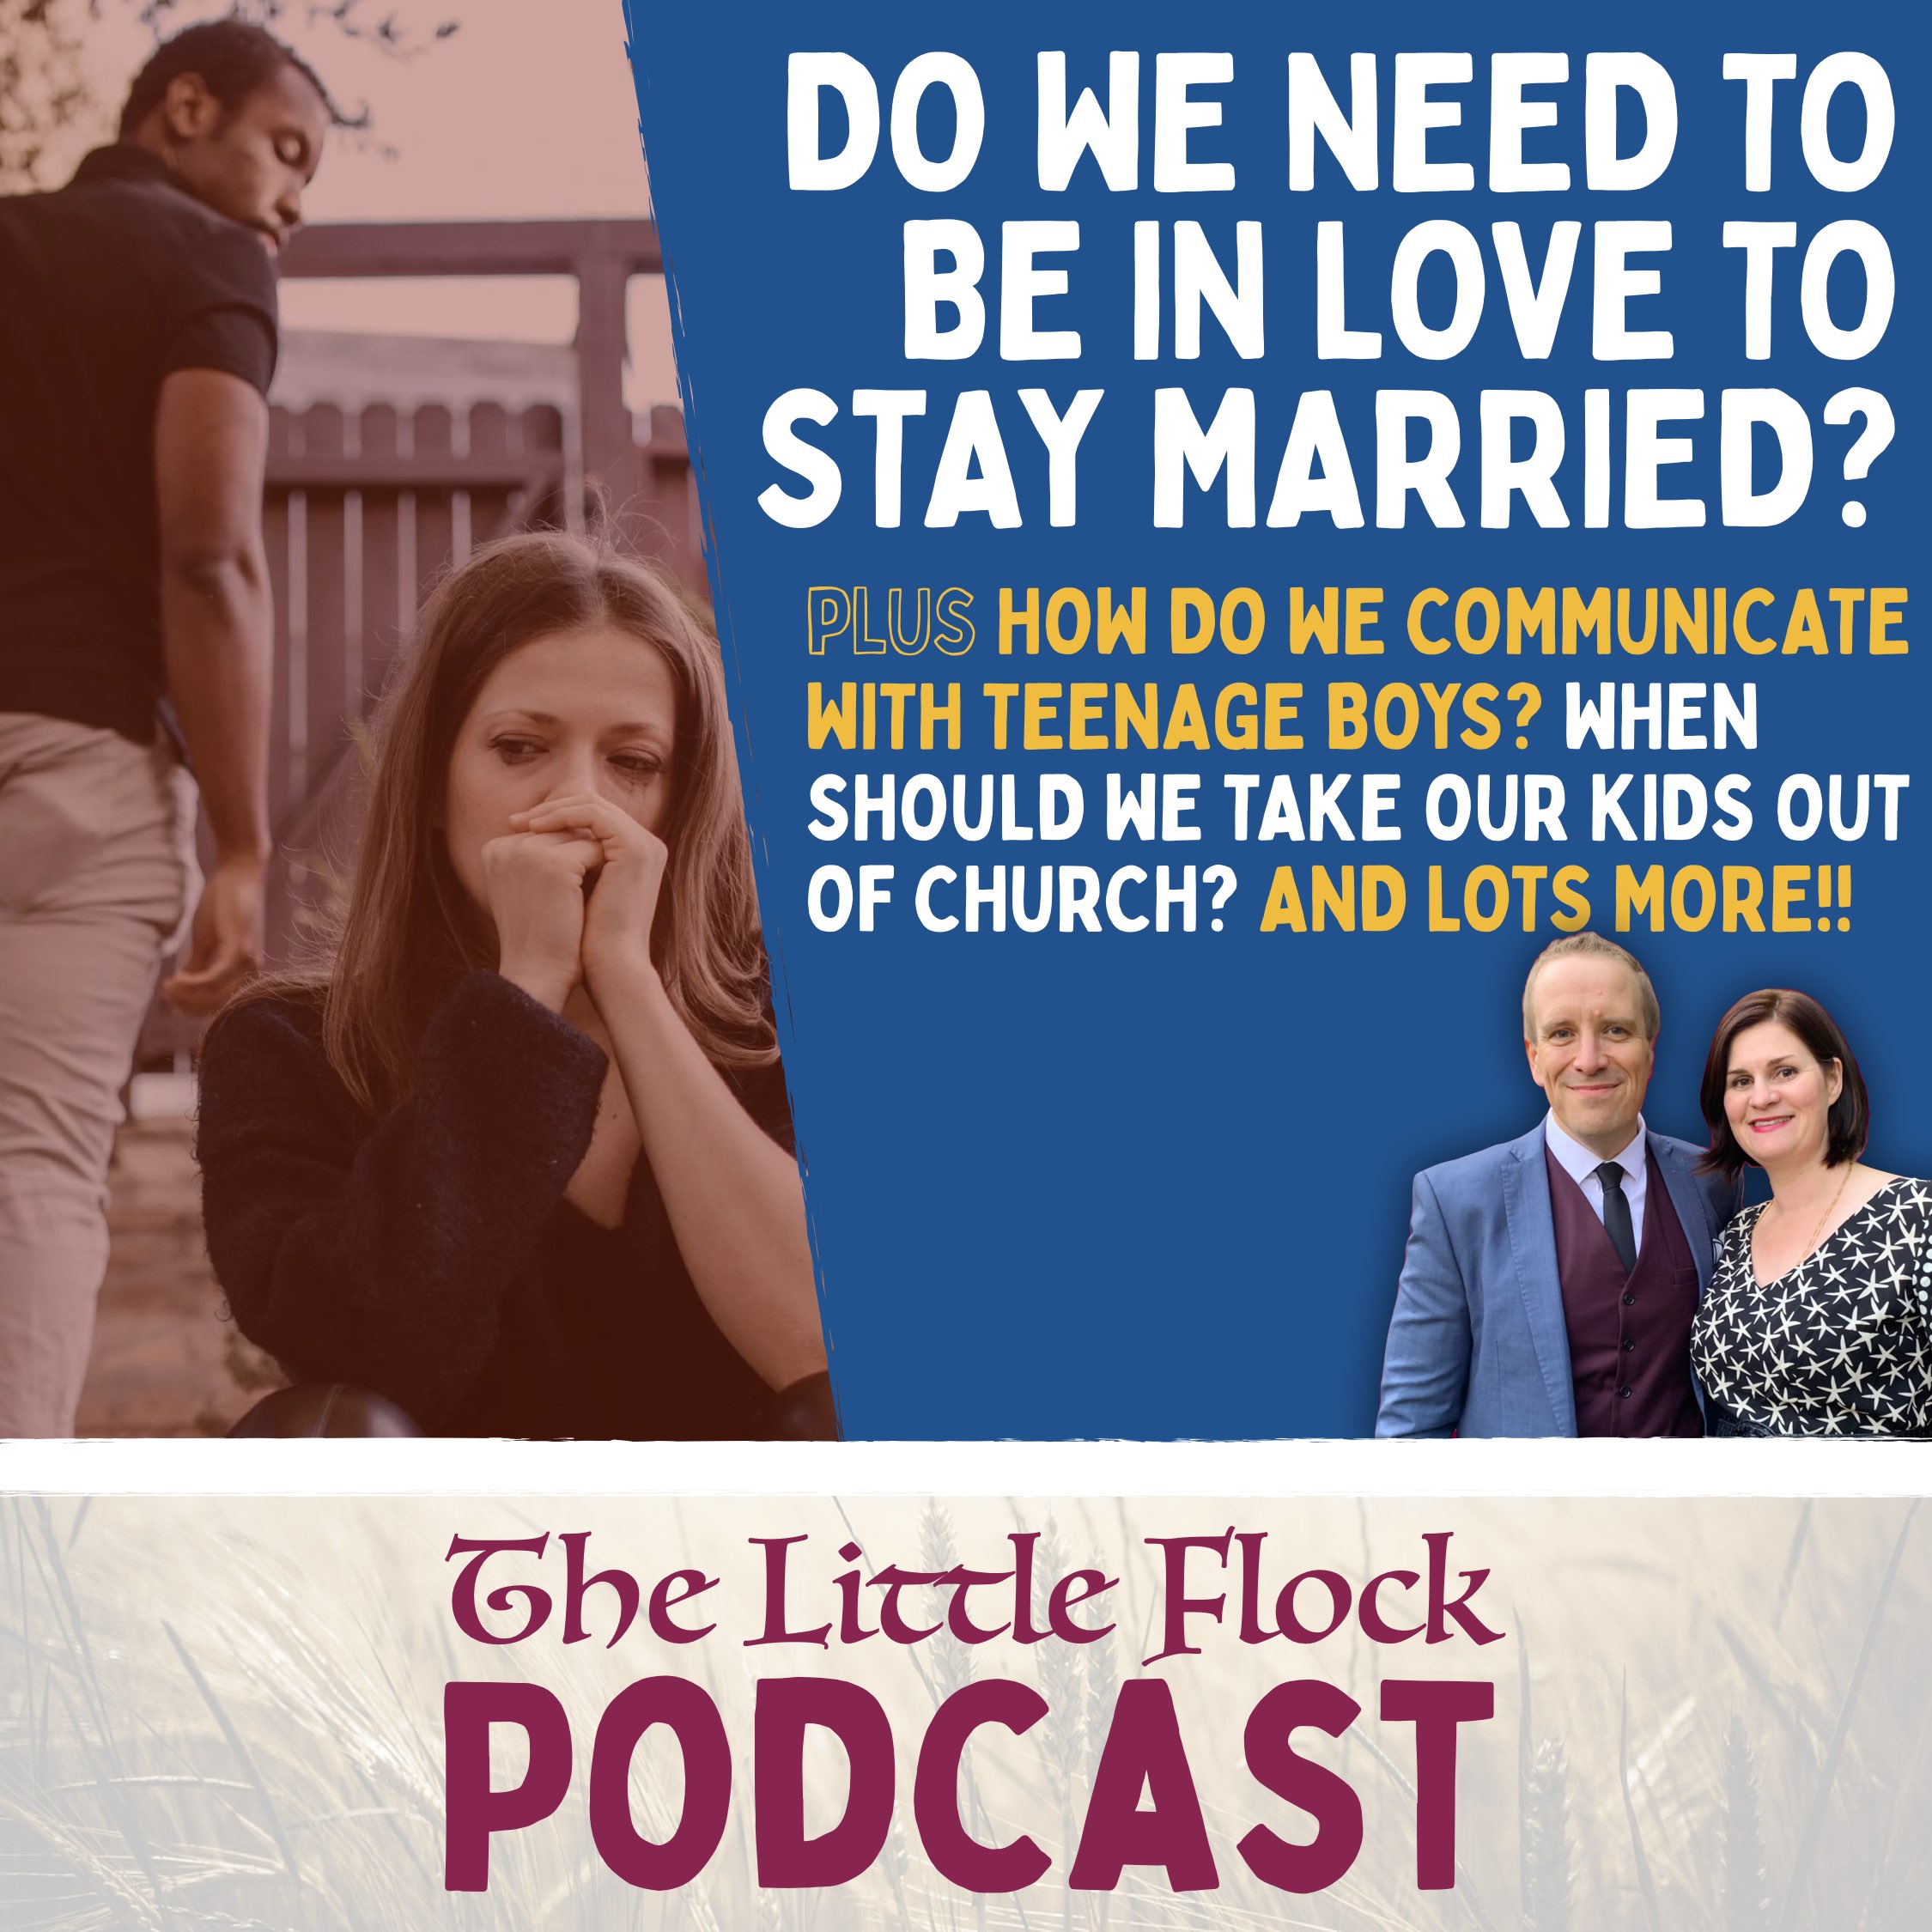 18. Do We Need to Be in Love to Stay Married? PLUS: How do we communicate with teenage boys? When should I take my kids out of church? AND LOTS MORE!